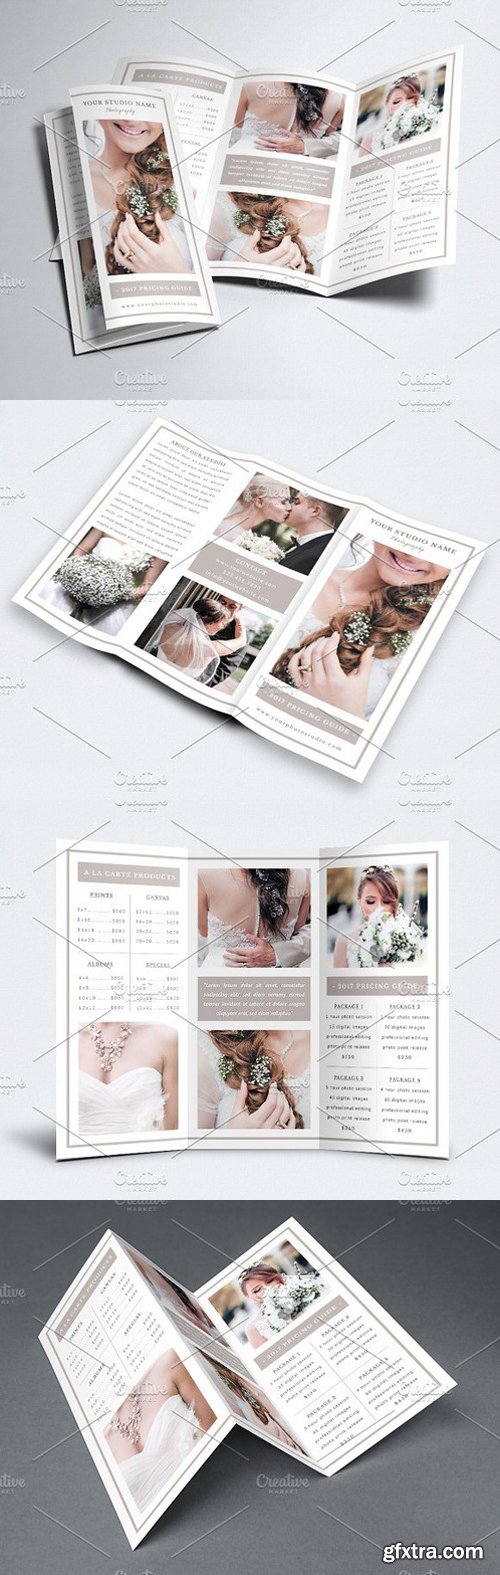 CM - Photography Trifold Brochure Template 1644003